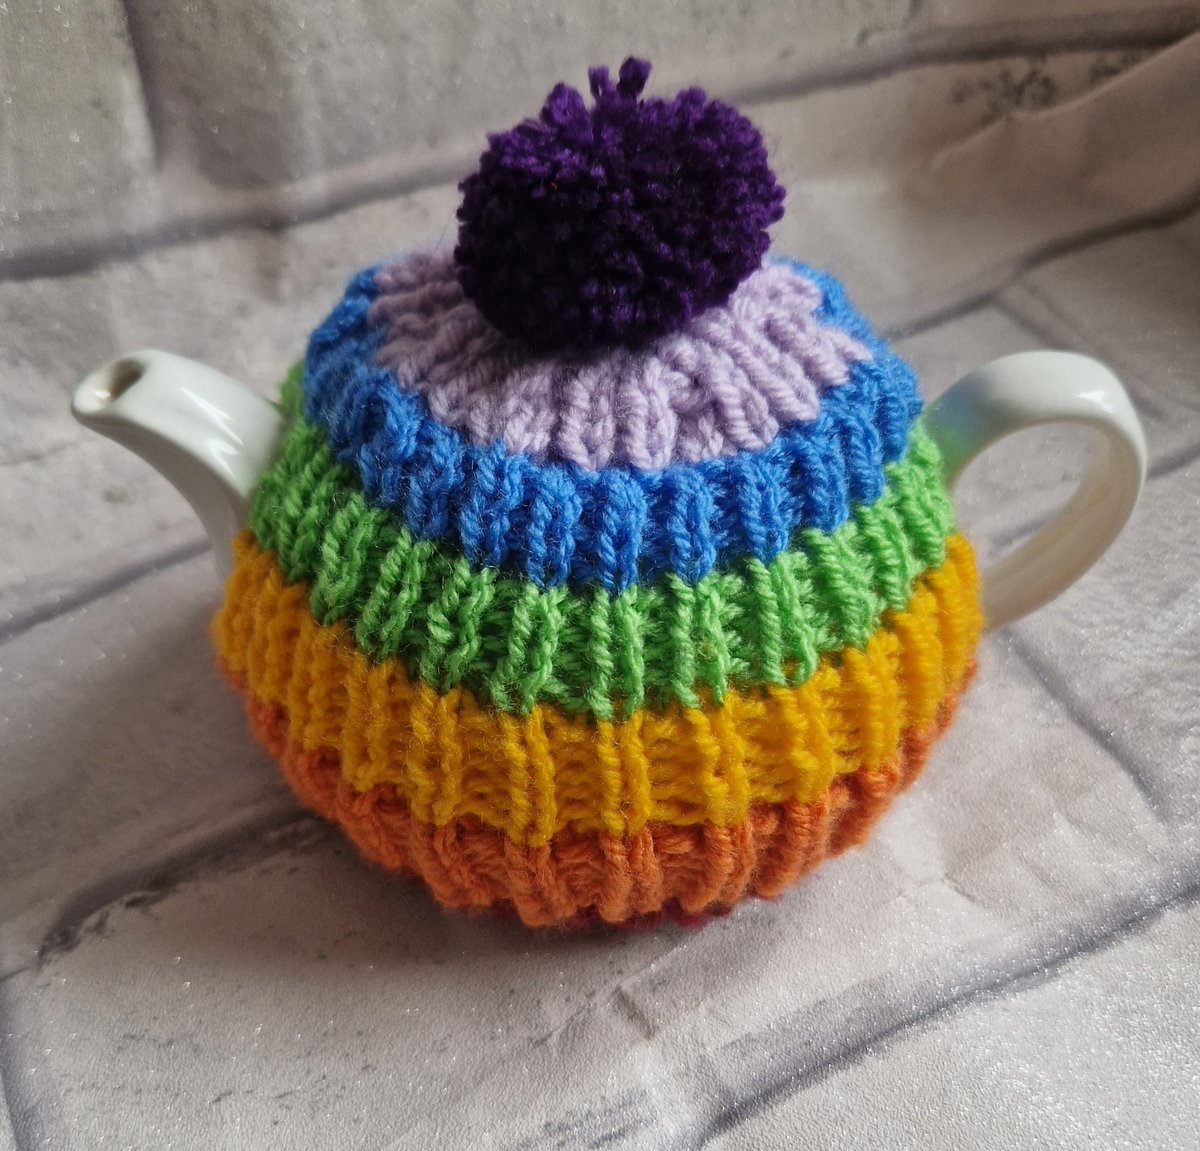 Time for tea ? 
Check out of teapot cosies at bahknitting.etsy.com this beauty is my smallest for a 2 cup pot 🫖☕️ #tetleytea #Yorkshiretea #teapotfolk #teapot #tradionaltea #afternoontea #teacosy #teacozy #HandmadeInUK